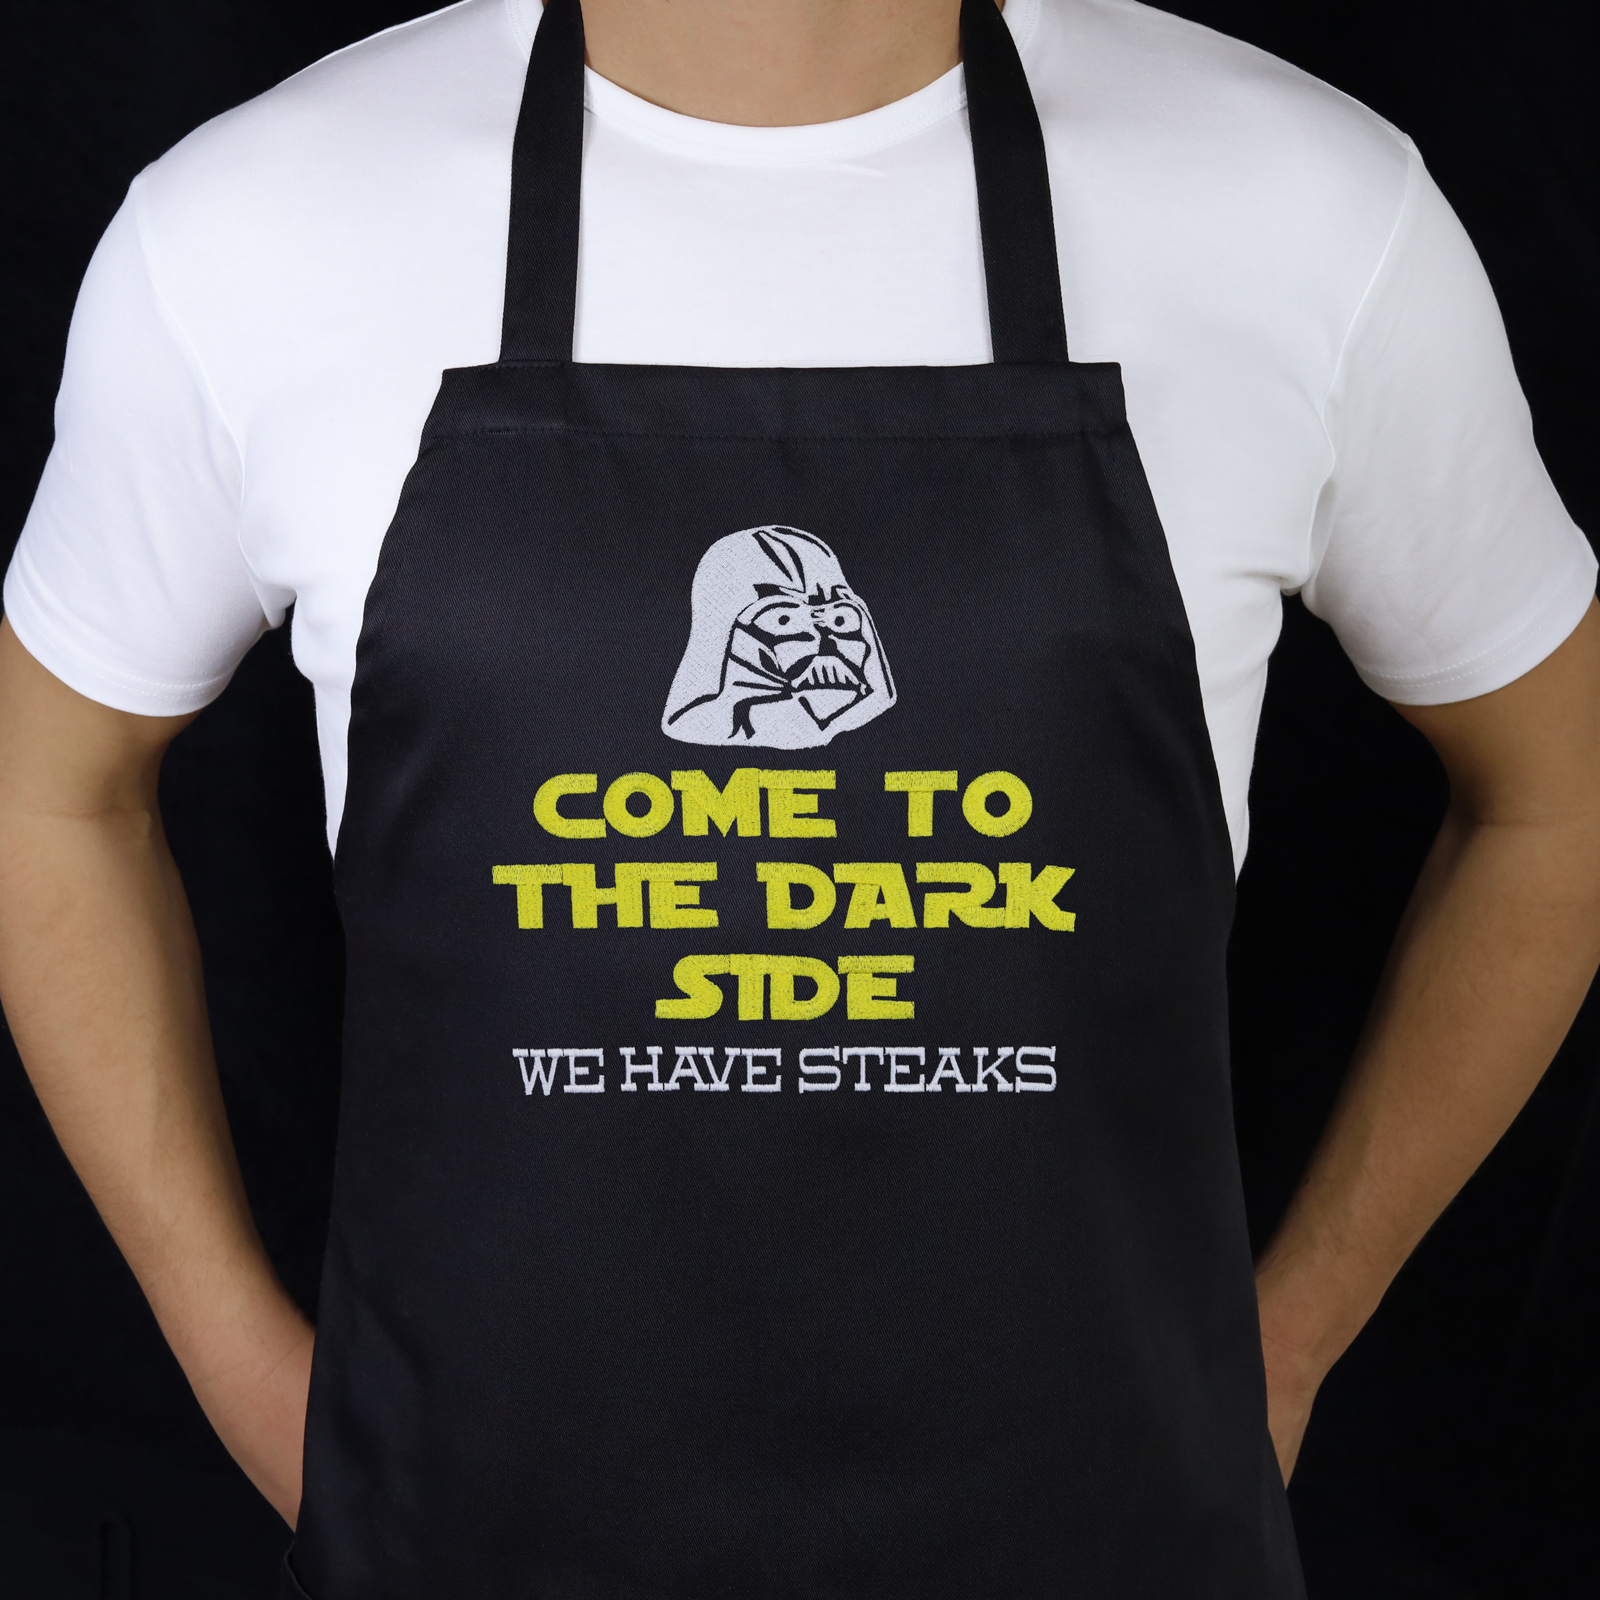 Come to the dark side we have steaks - Grillschürze